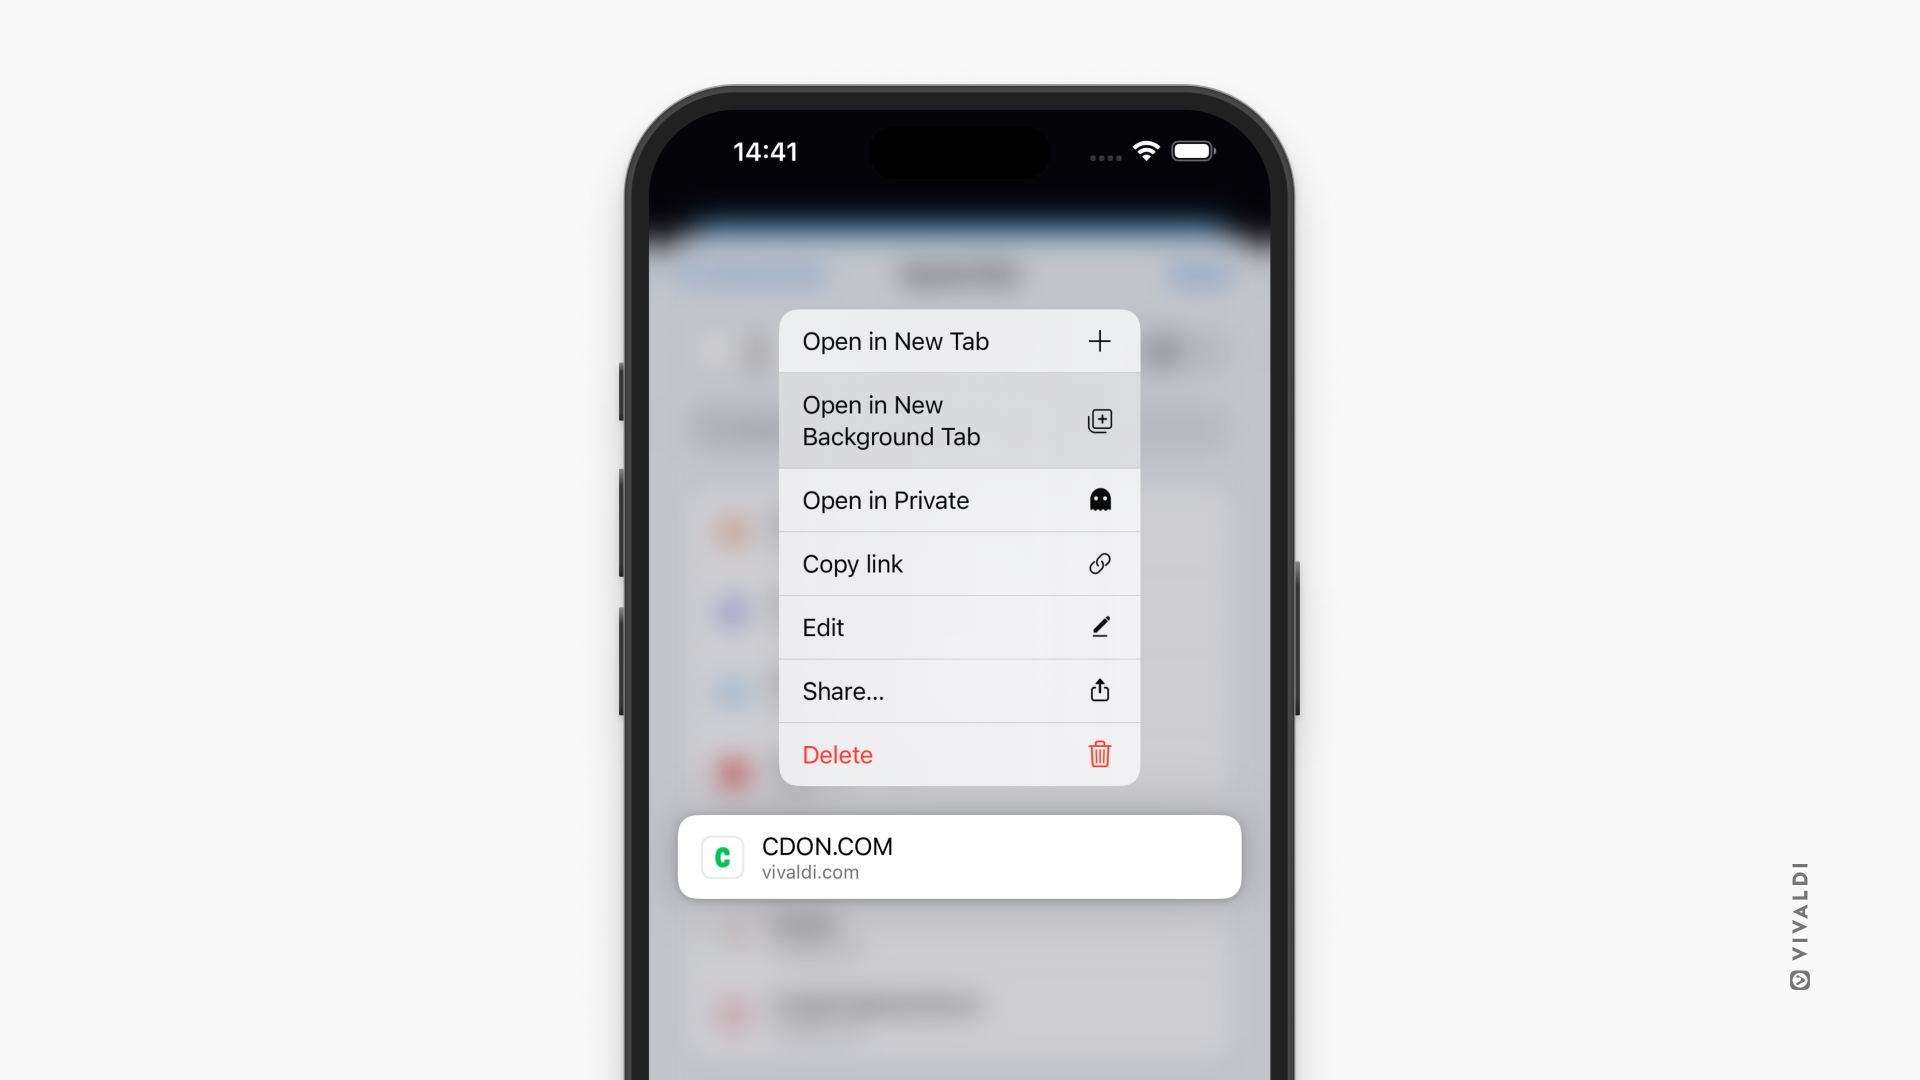 Bookmark context menu highlighting the option to open it in a new background tab in Vivaldi on iOS.